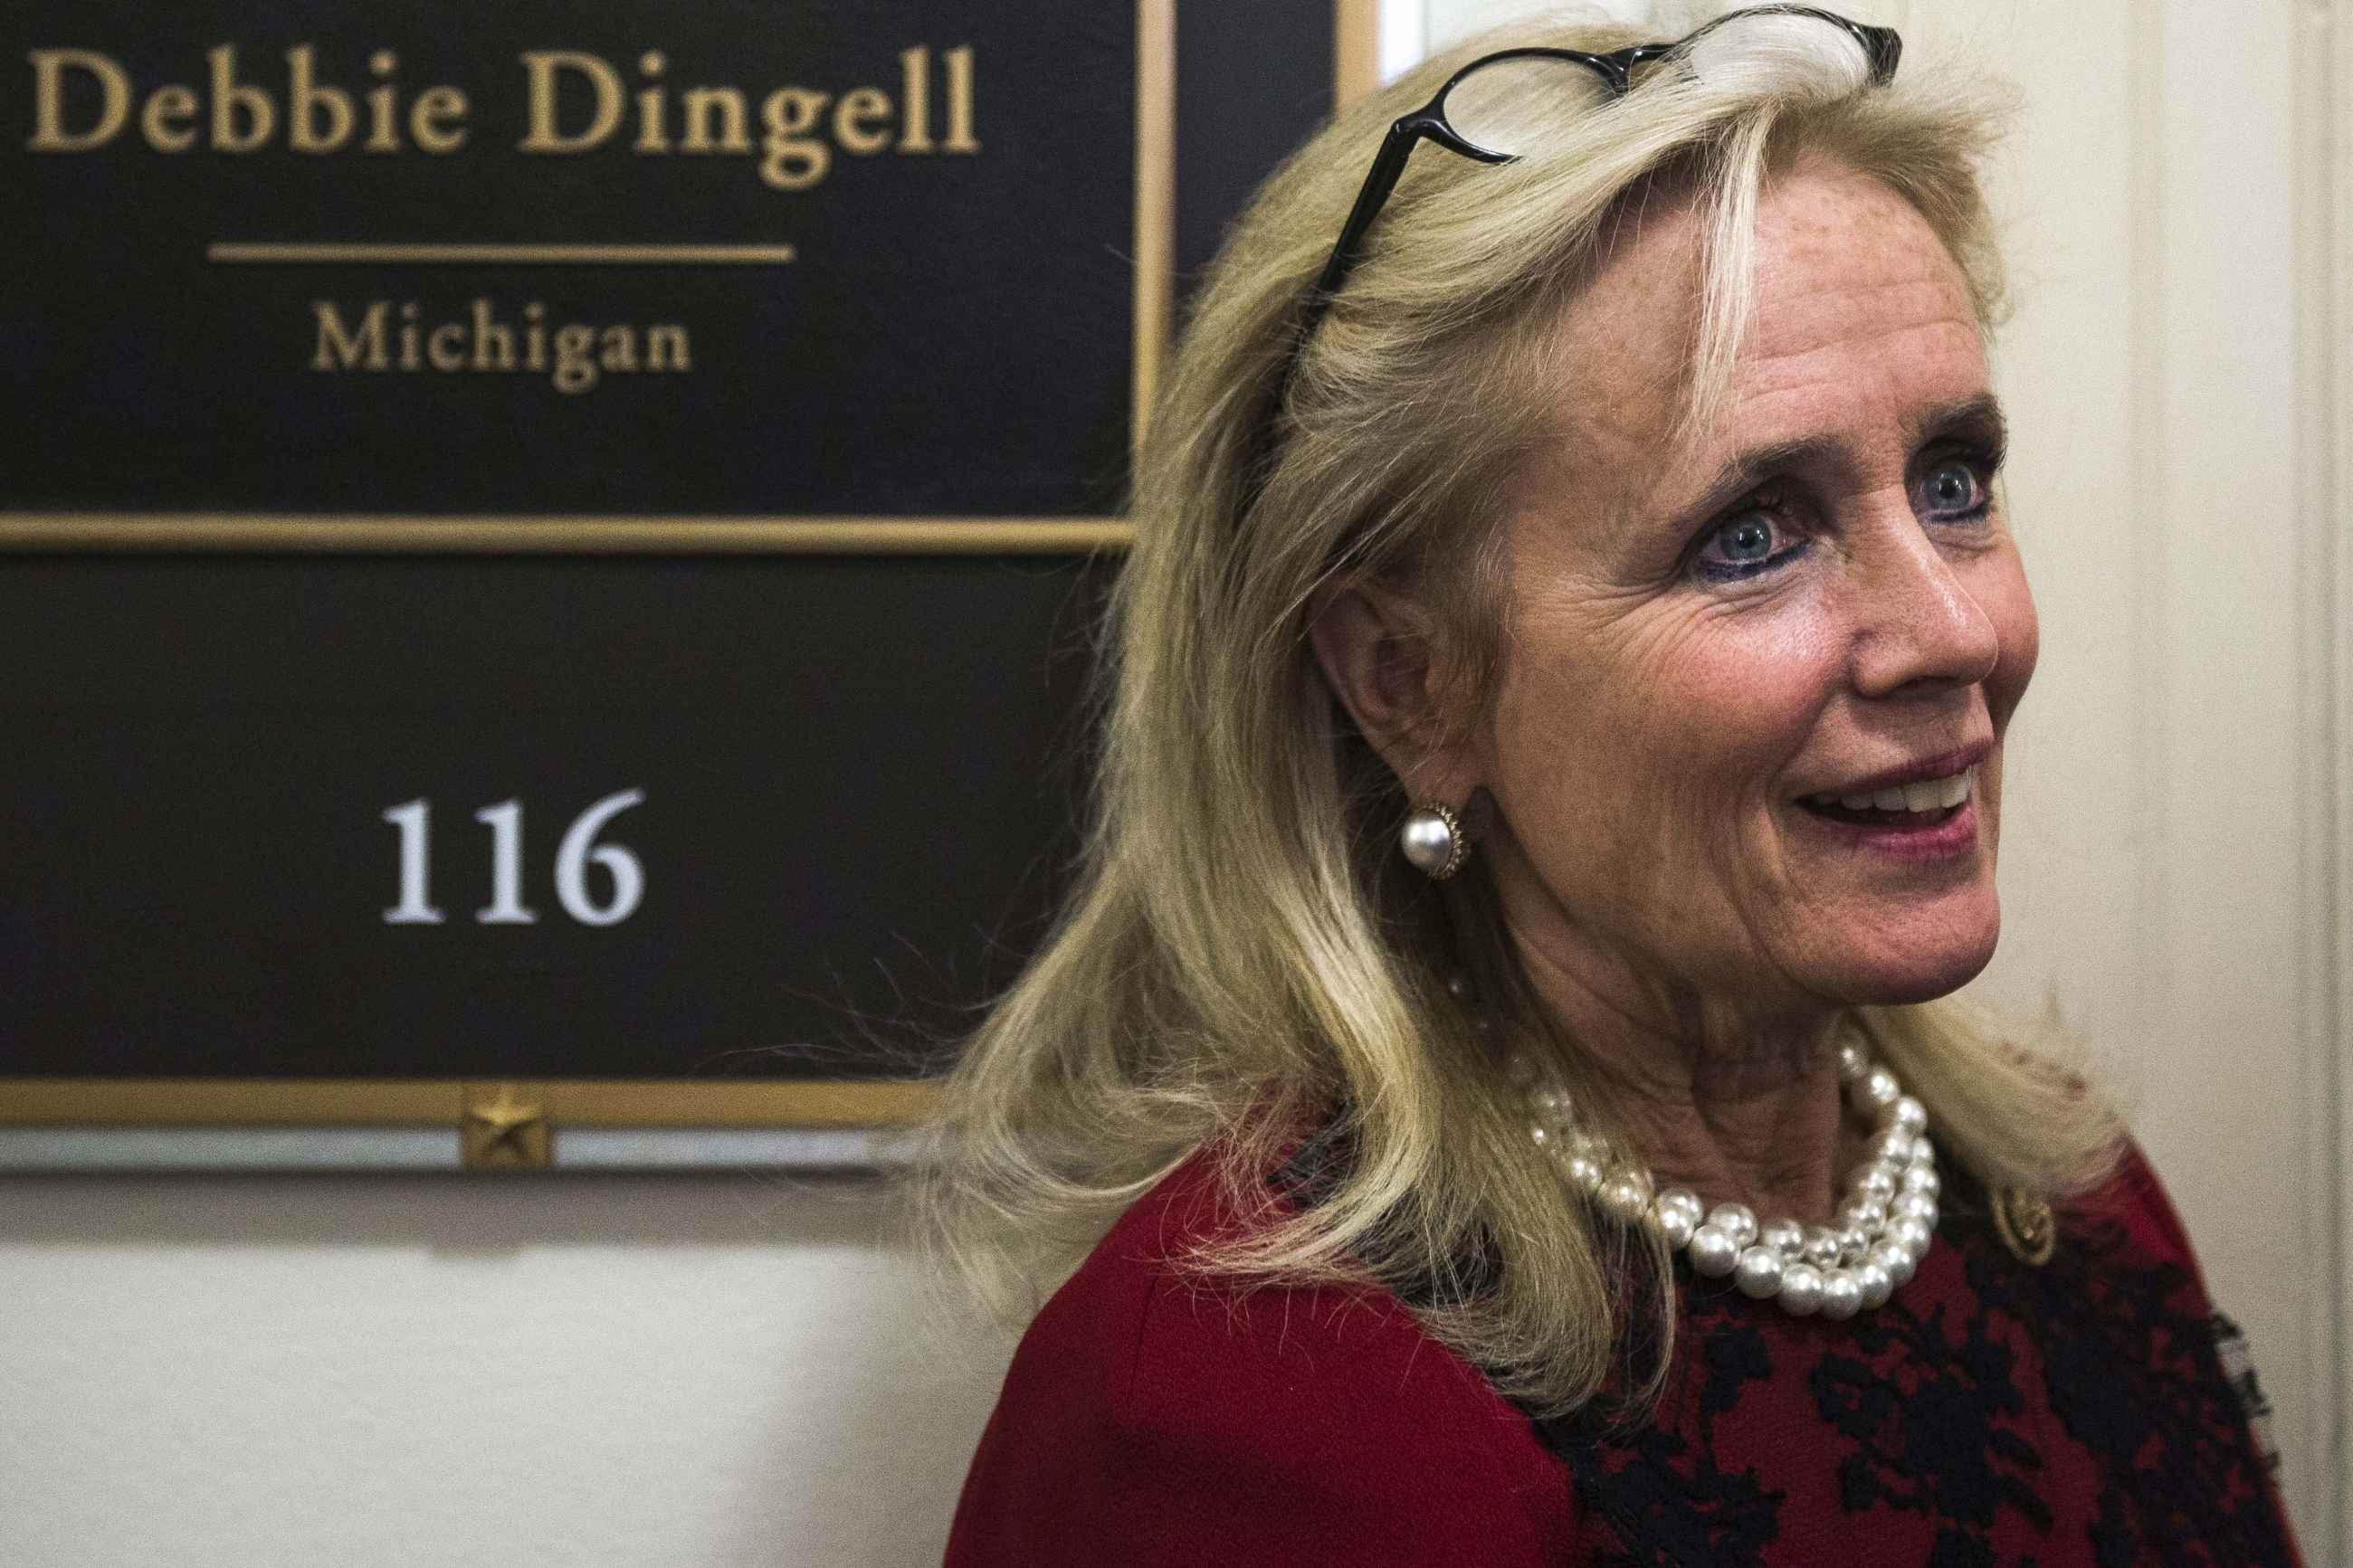 Dingell took over the seat from her husband, the late Democratic Congressman John Dingell, in 2015.